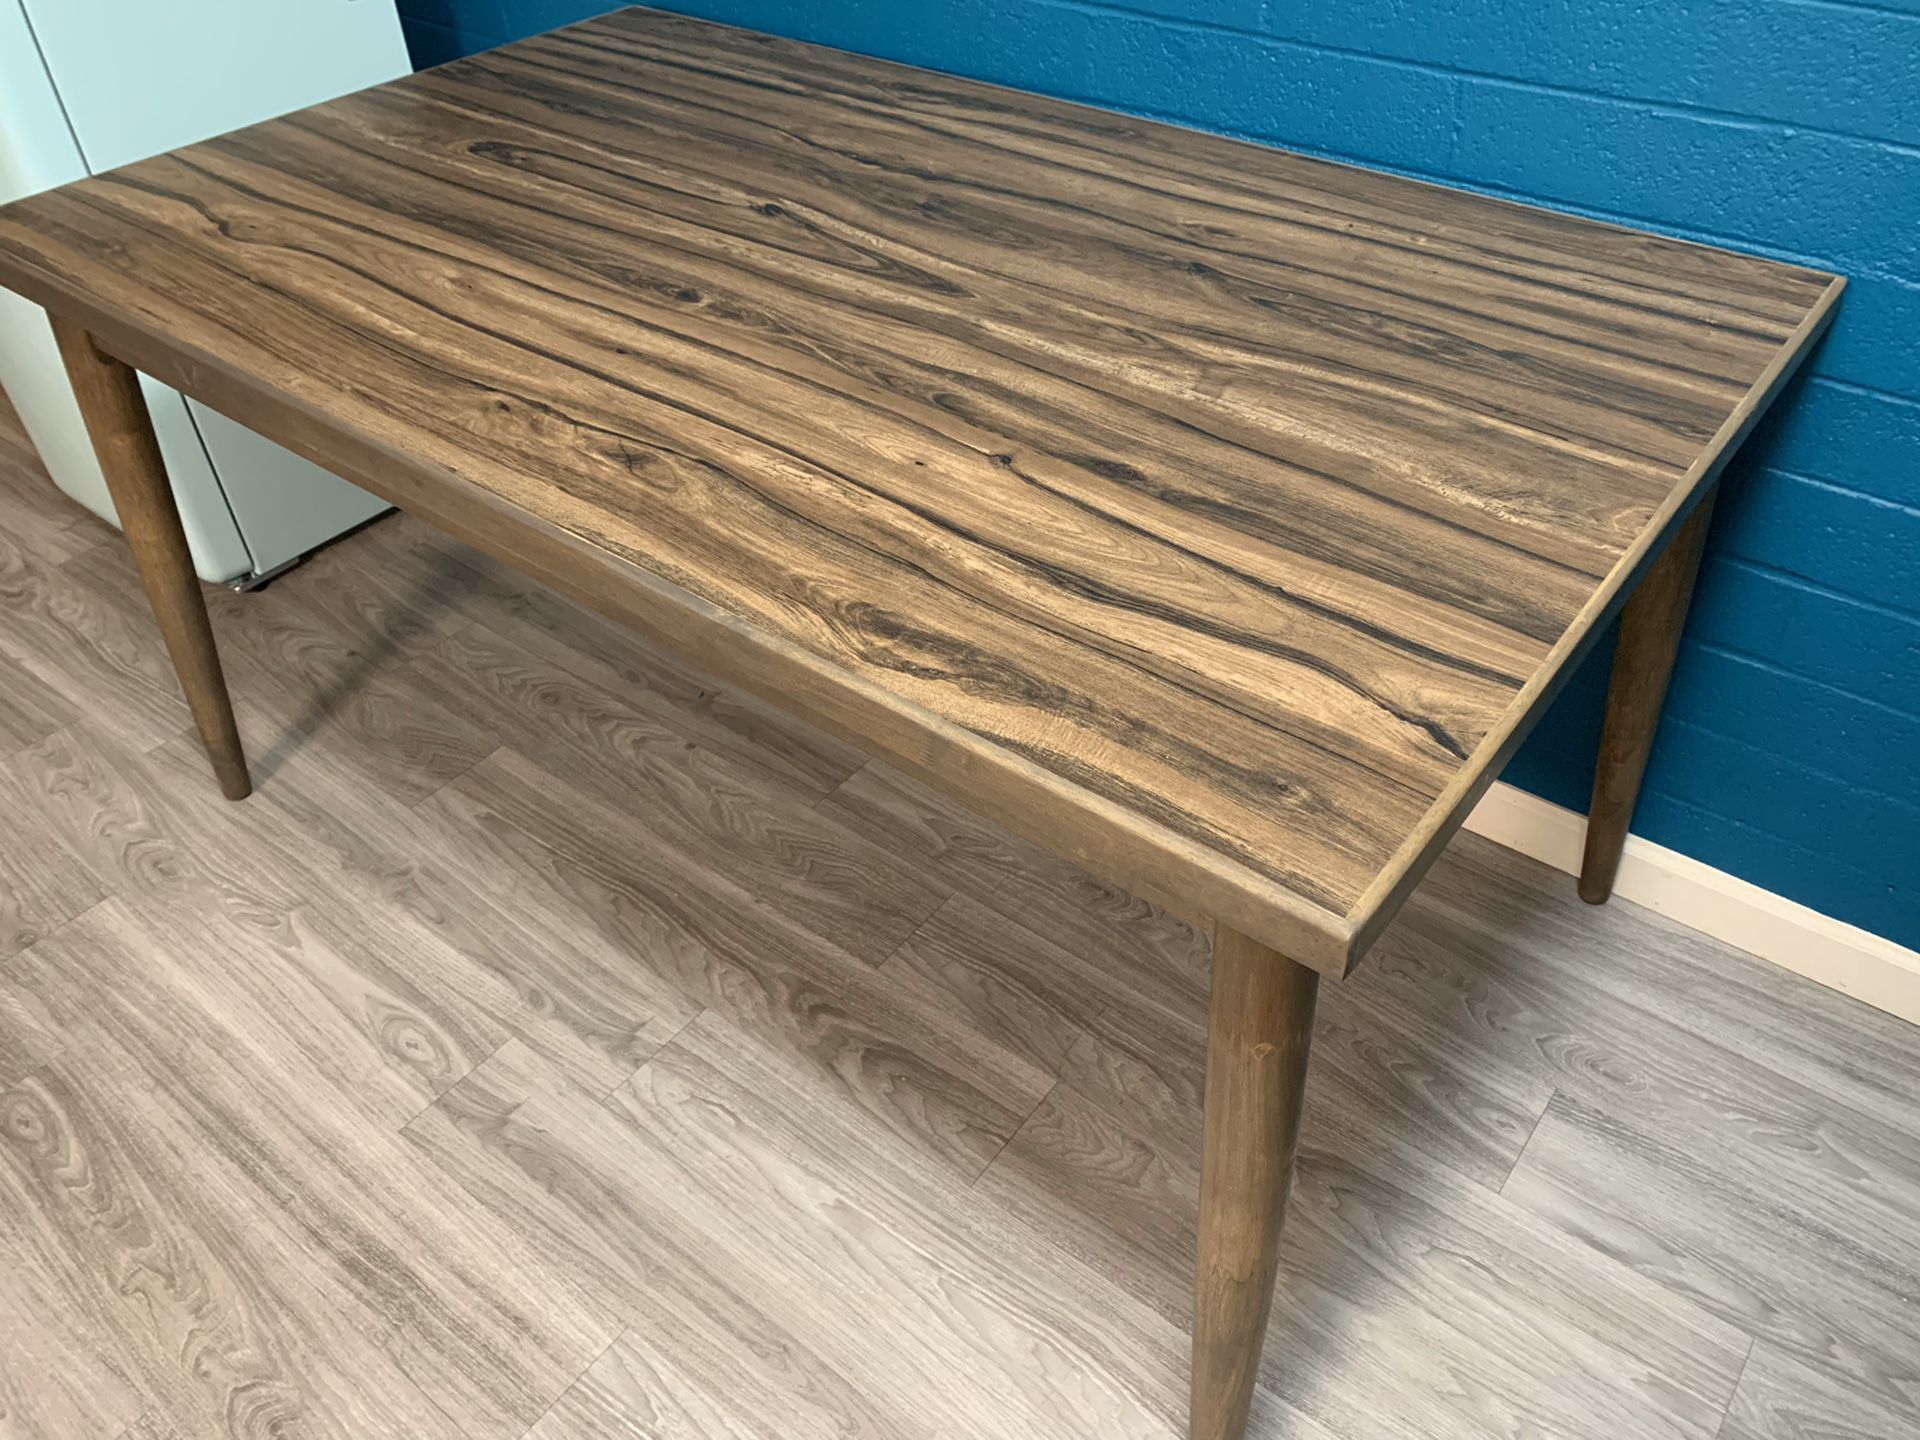 Kitchen table from target